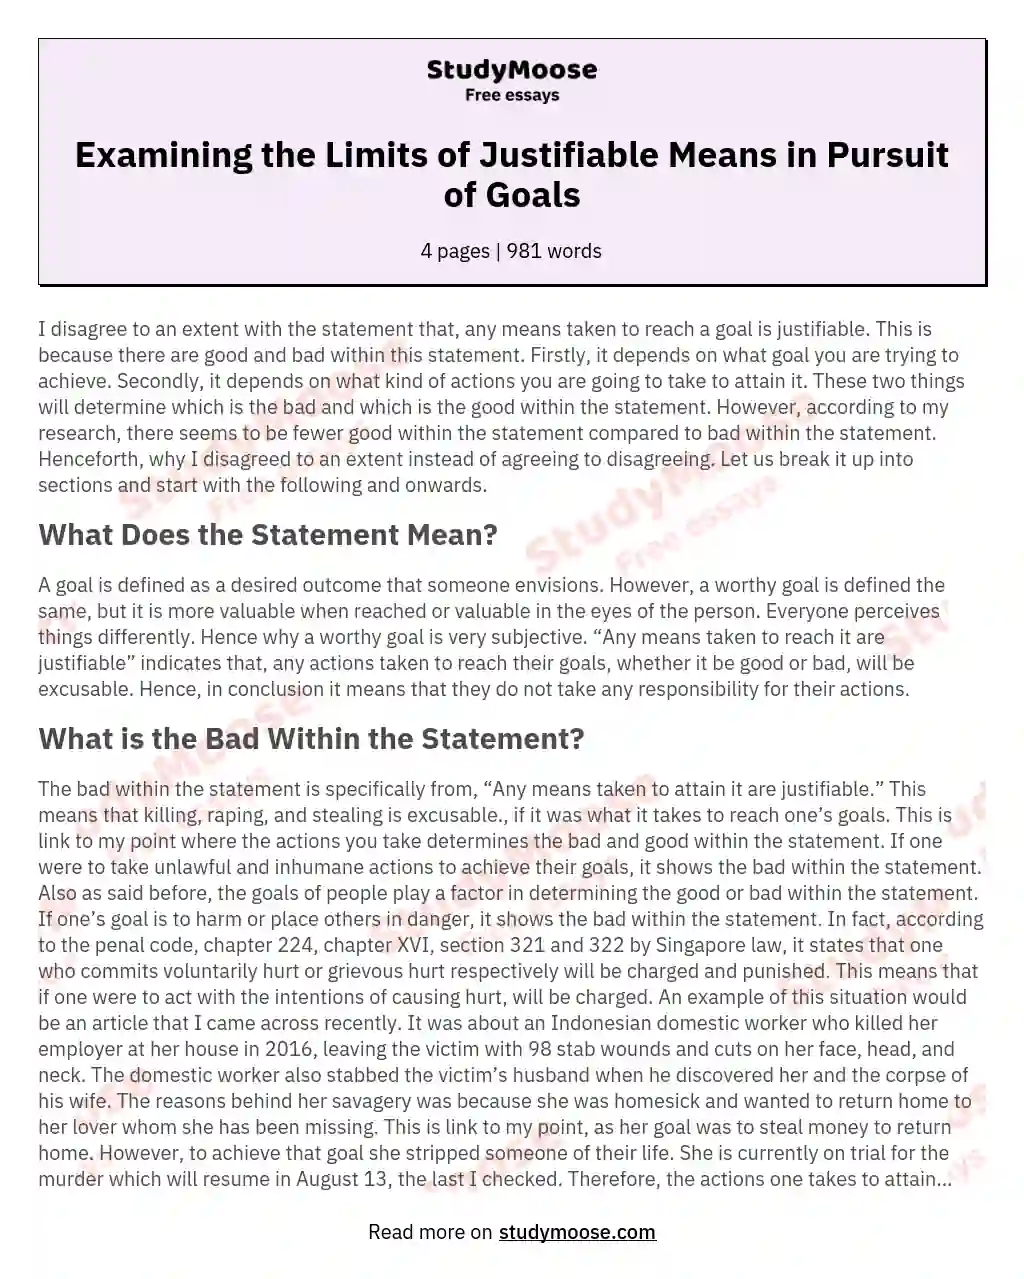 Examining the Limits of Justifiable Means in Pursuit of Goals essay